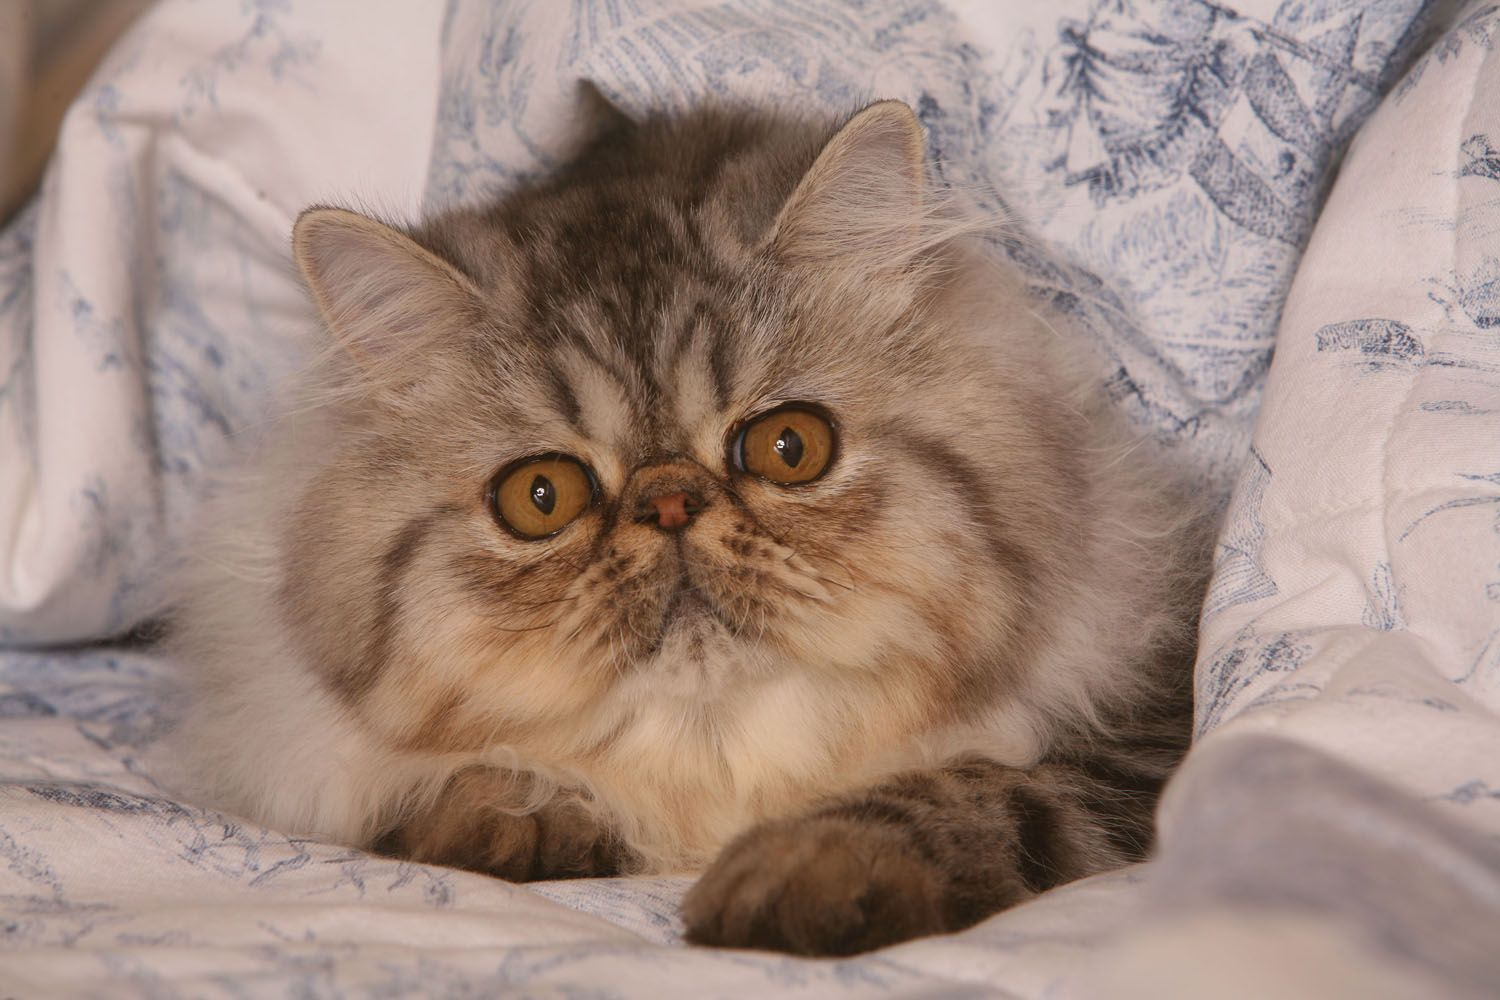 Persian cat peeking out of a blue and white duvet